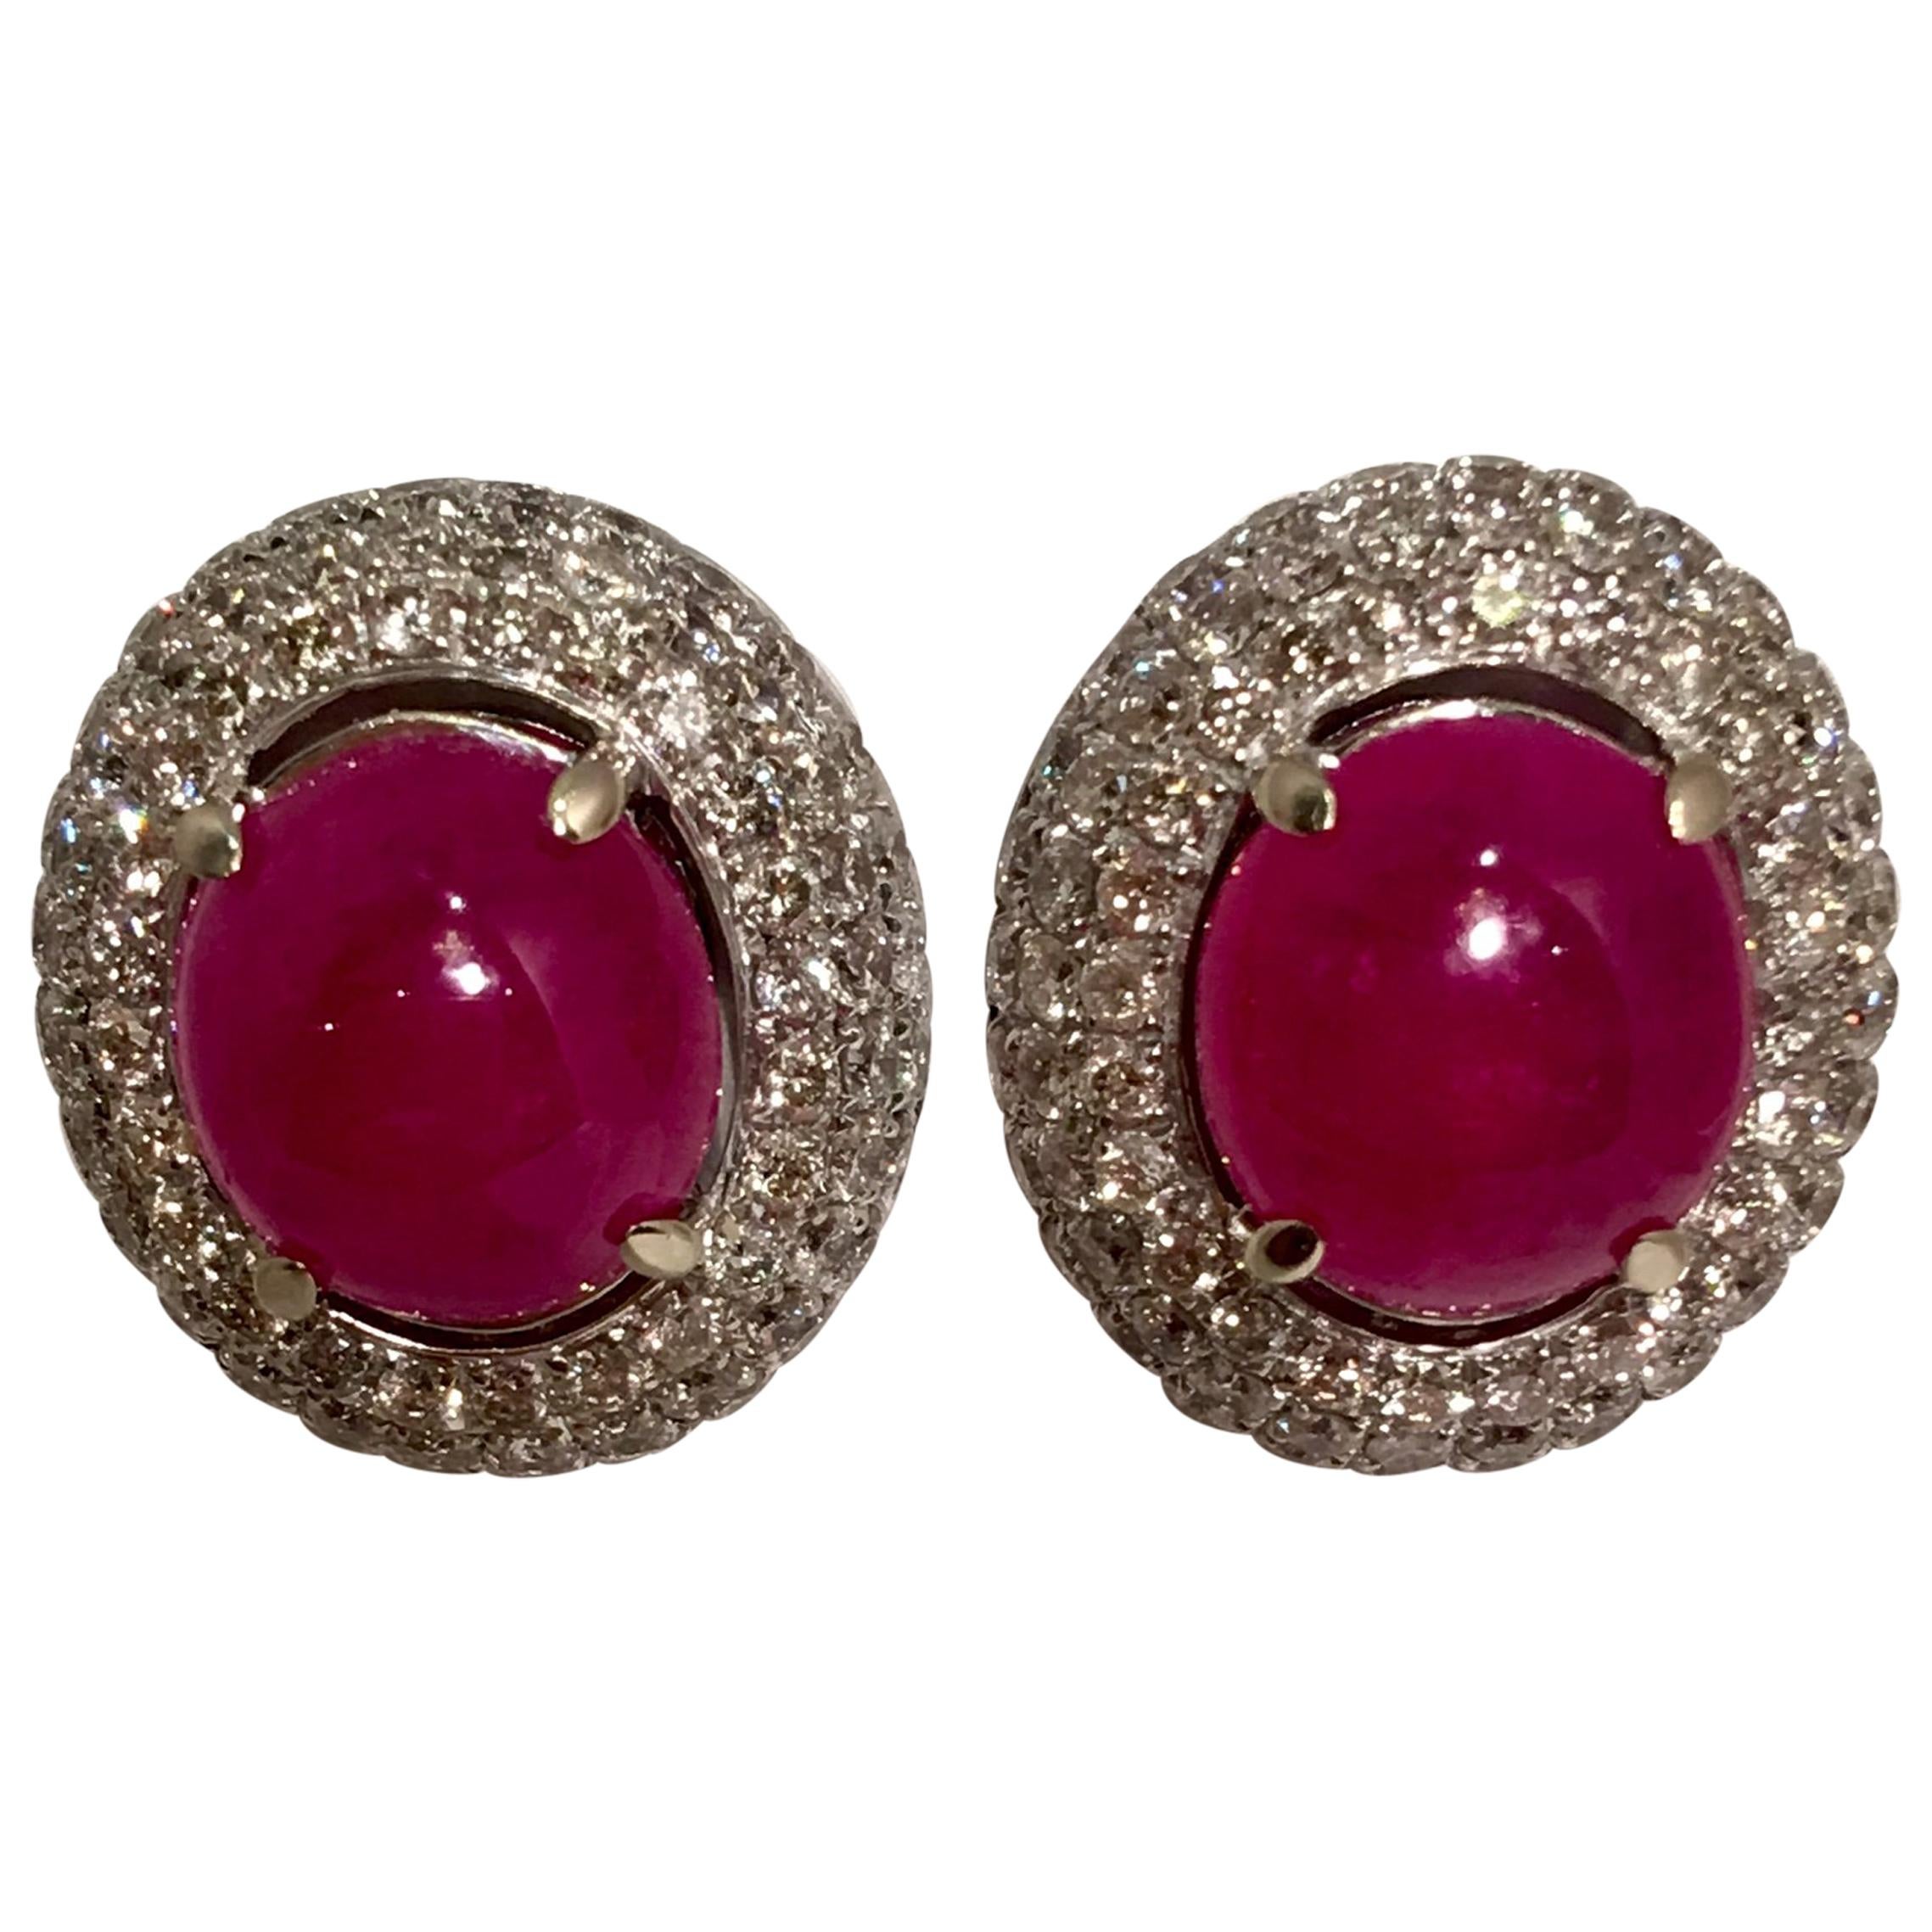 Striking 6 Carat Oval Ruby Cabochon Triple Diamond Halo White Gold Post Earrings For Sale